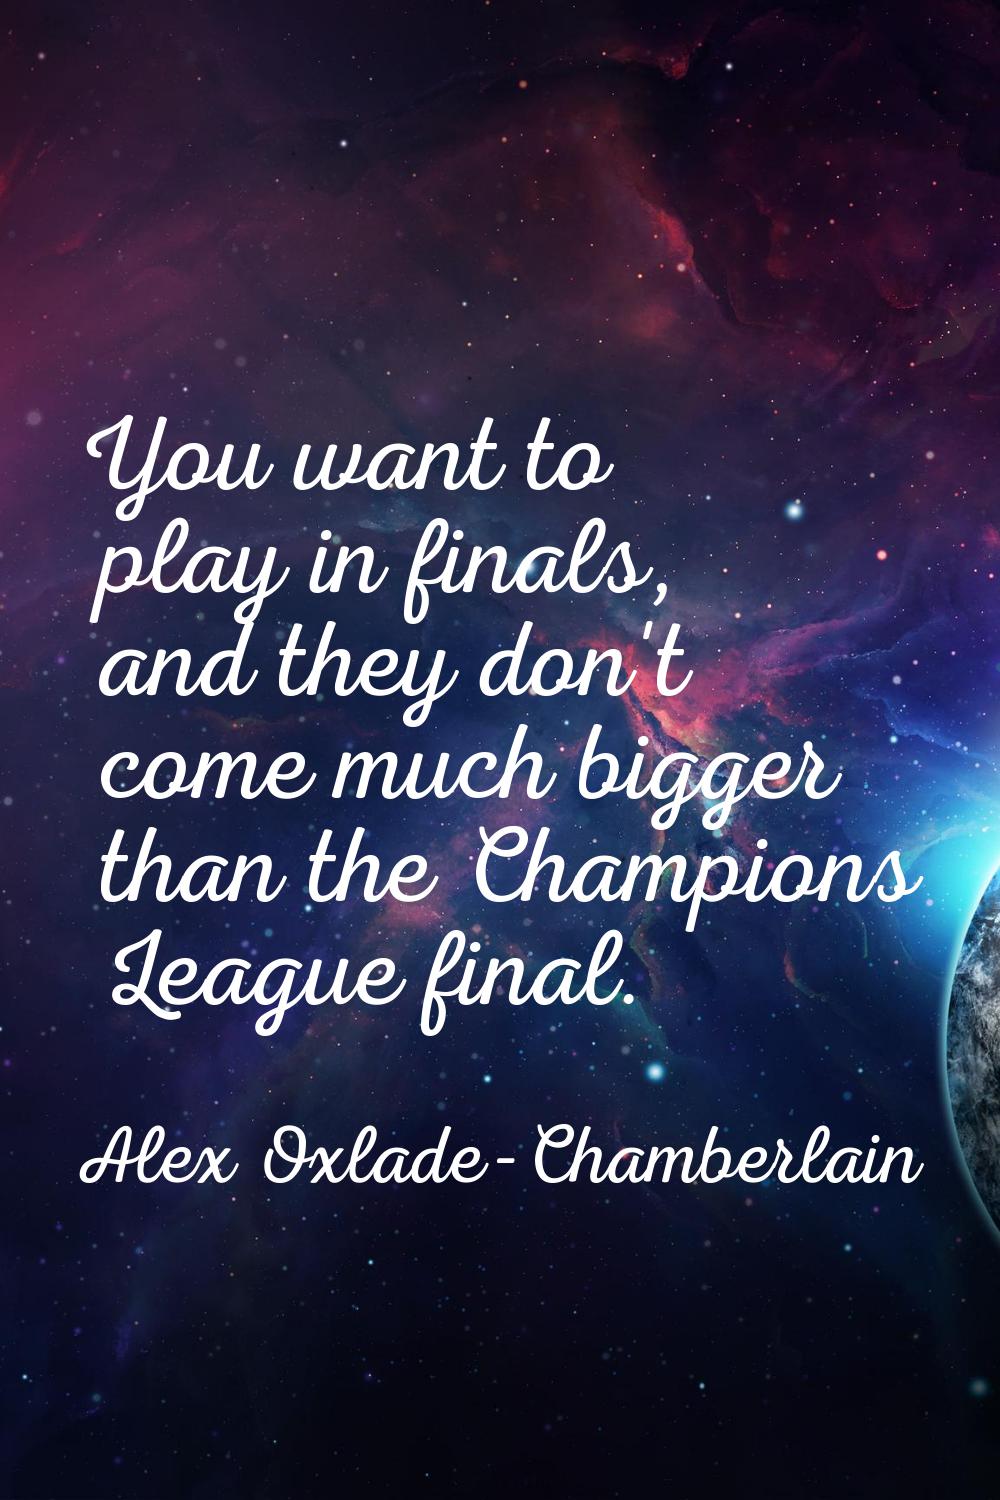 You want to play in finals, and they don't come much bigger than the Champions League final.